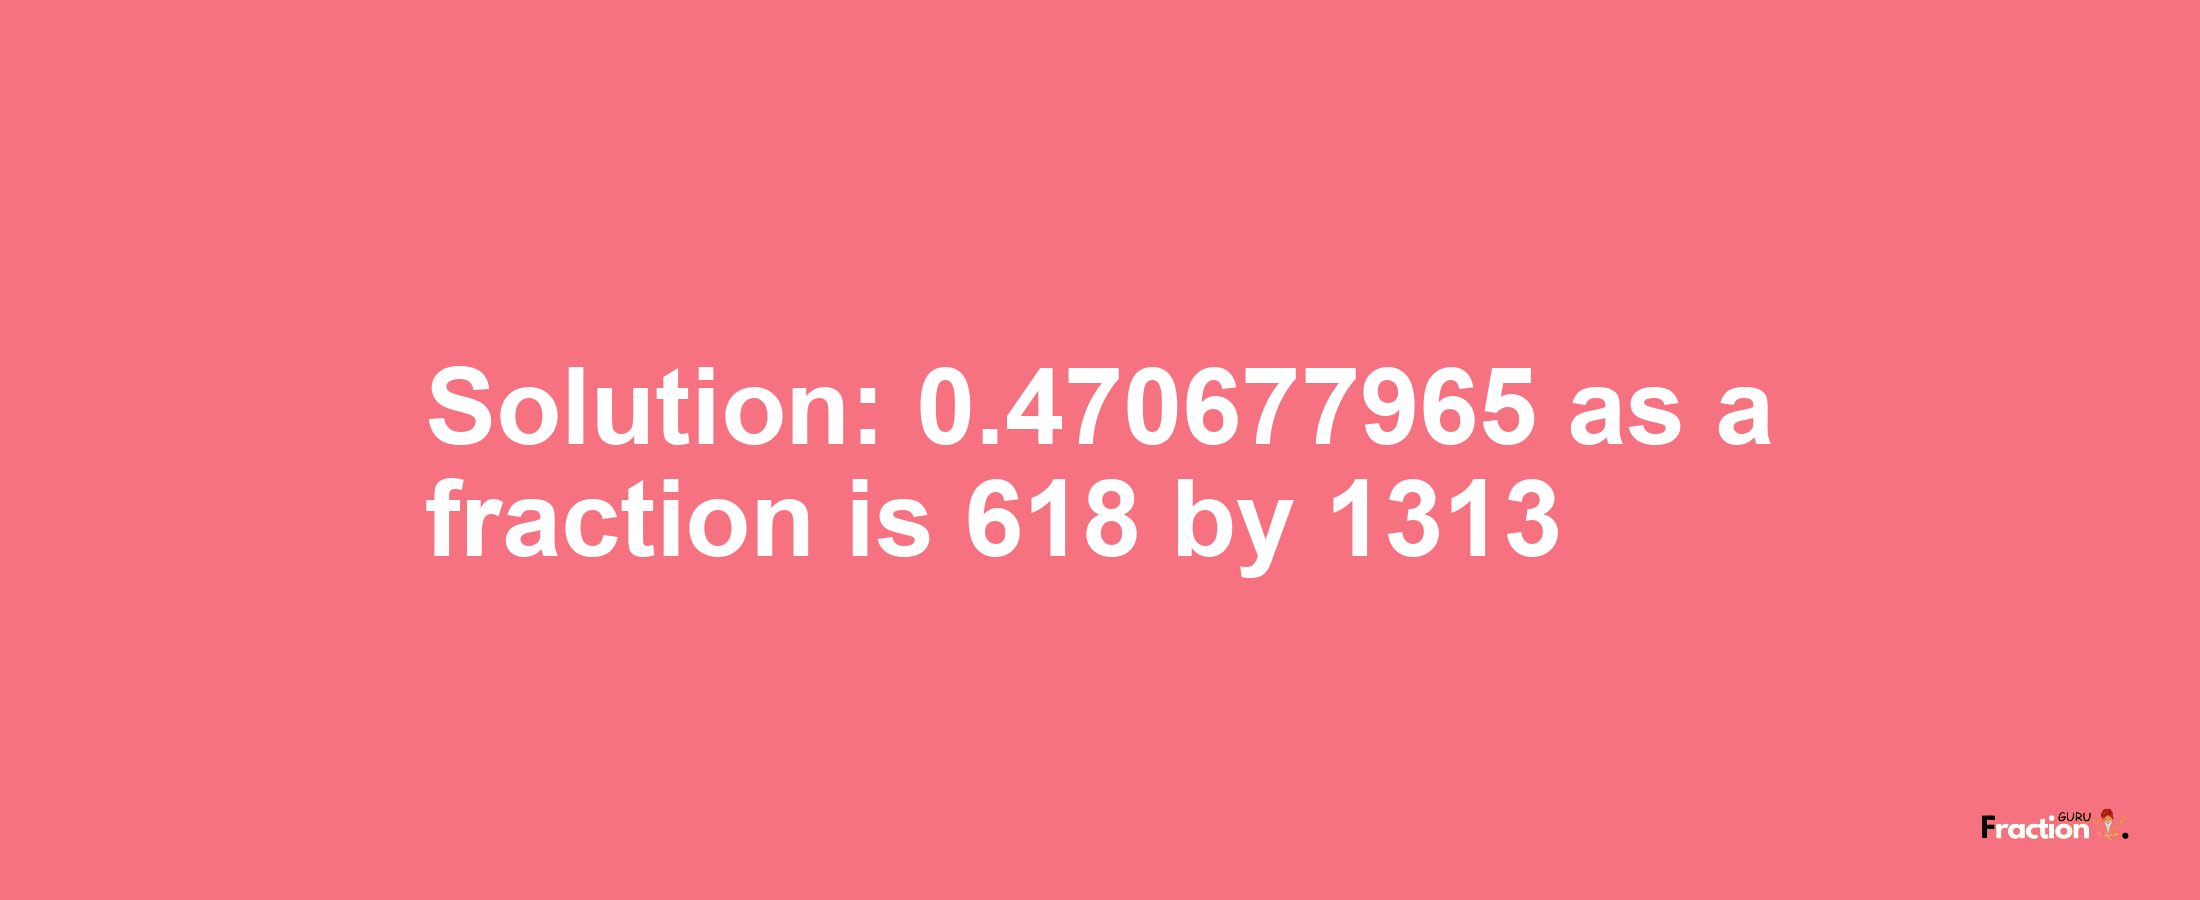 Solution:0.470677965 as a fraction is 618/1313